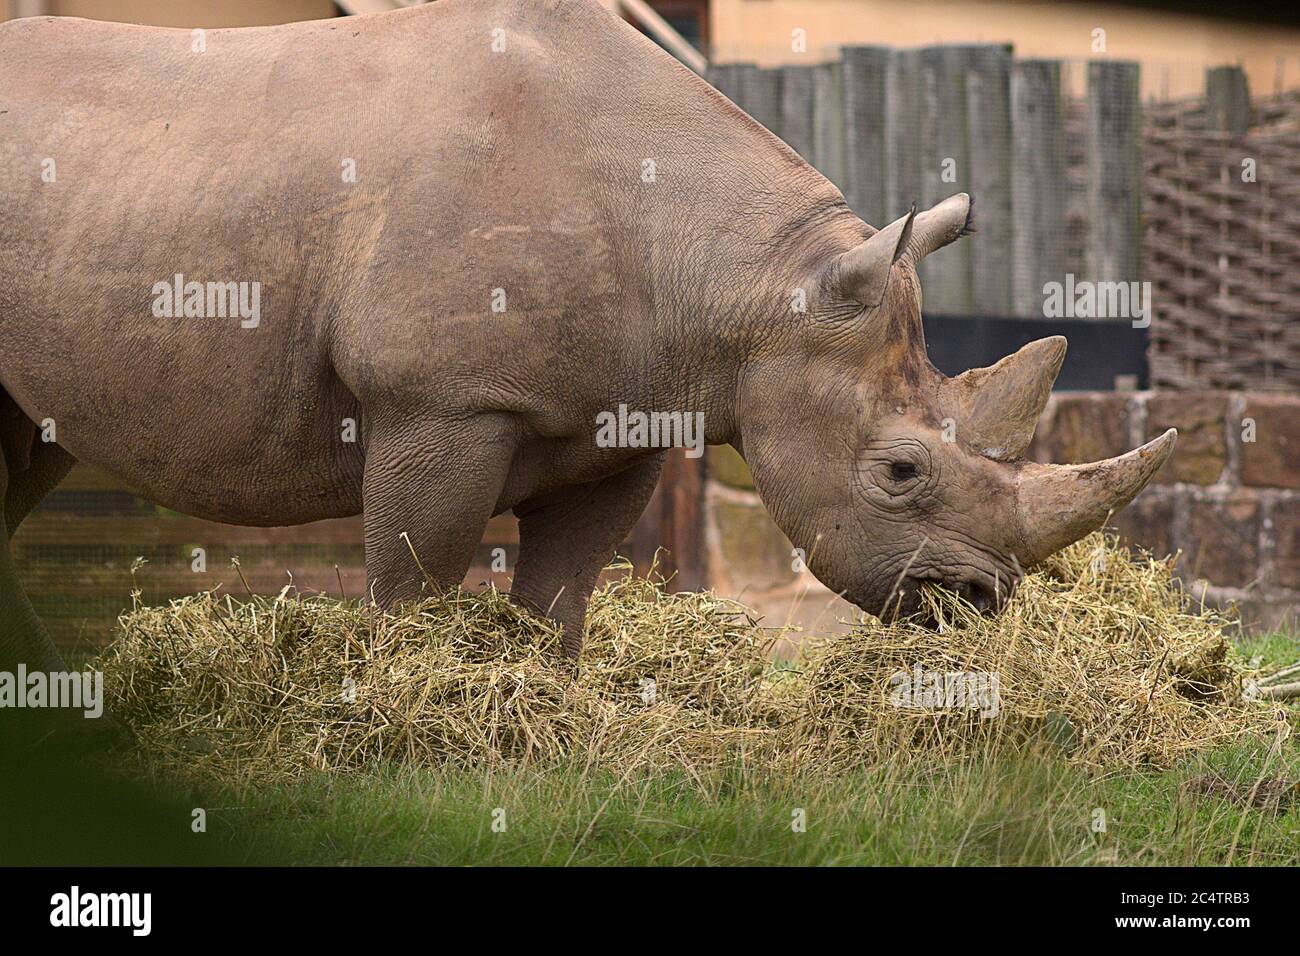 A large, female Black Rhinoceros at Chester Zoo in northwest England. Critically endangered as a species, largely due to predators and poachers. Stock Photo